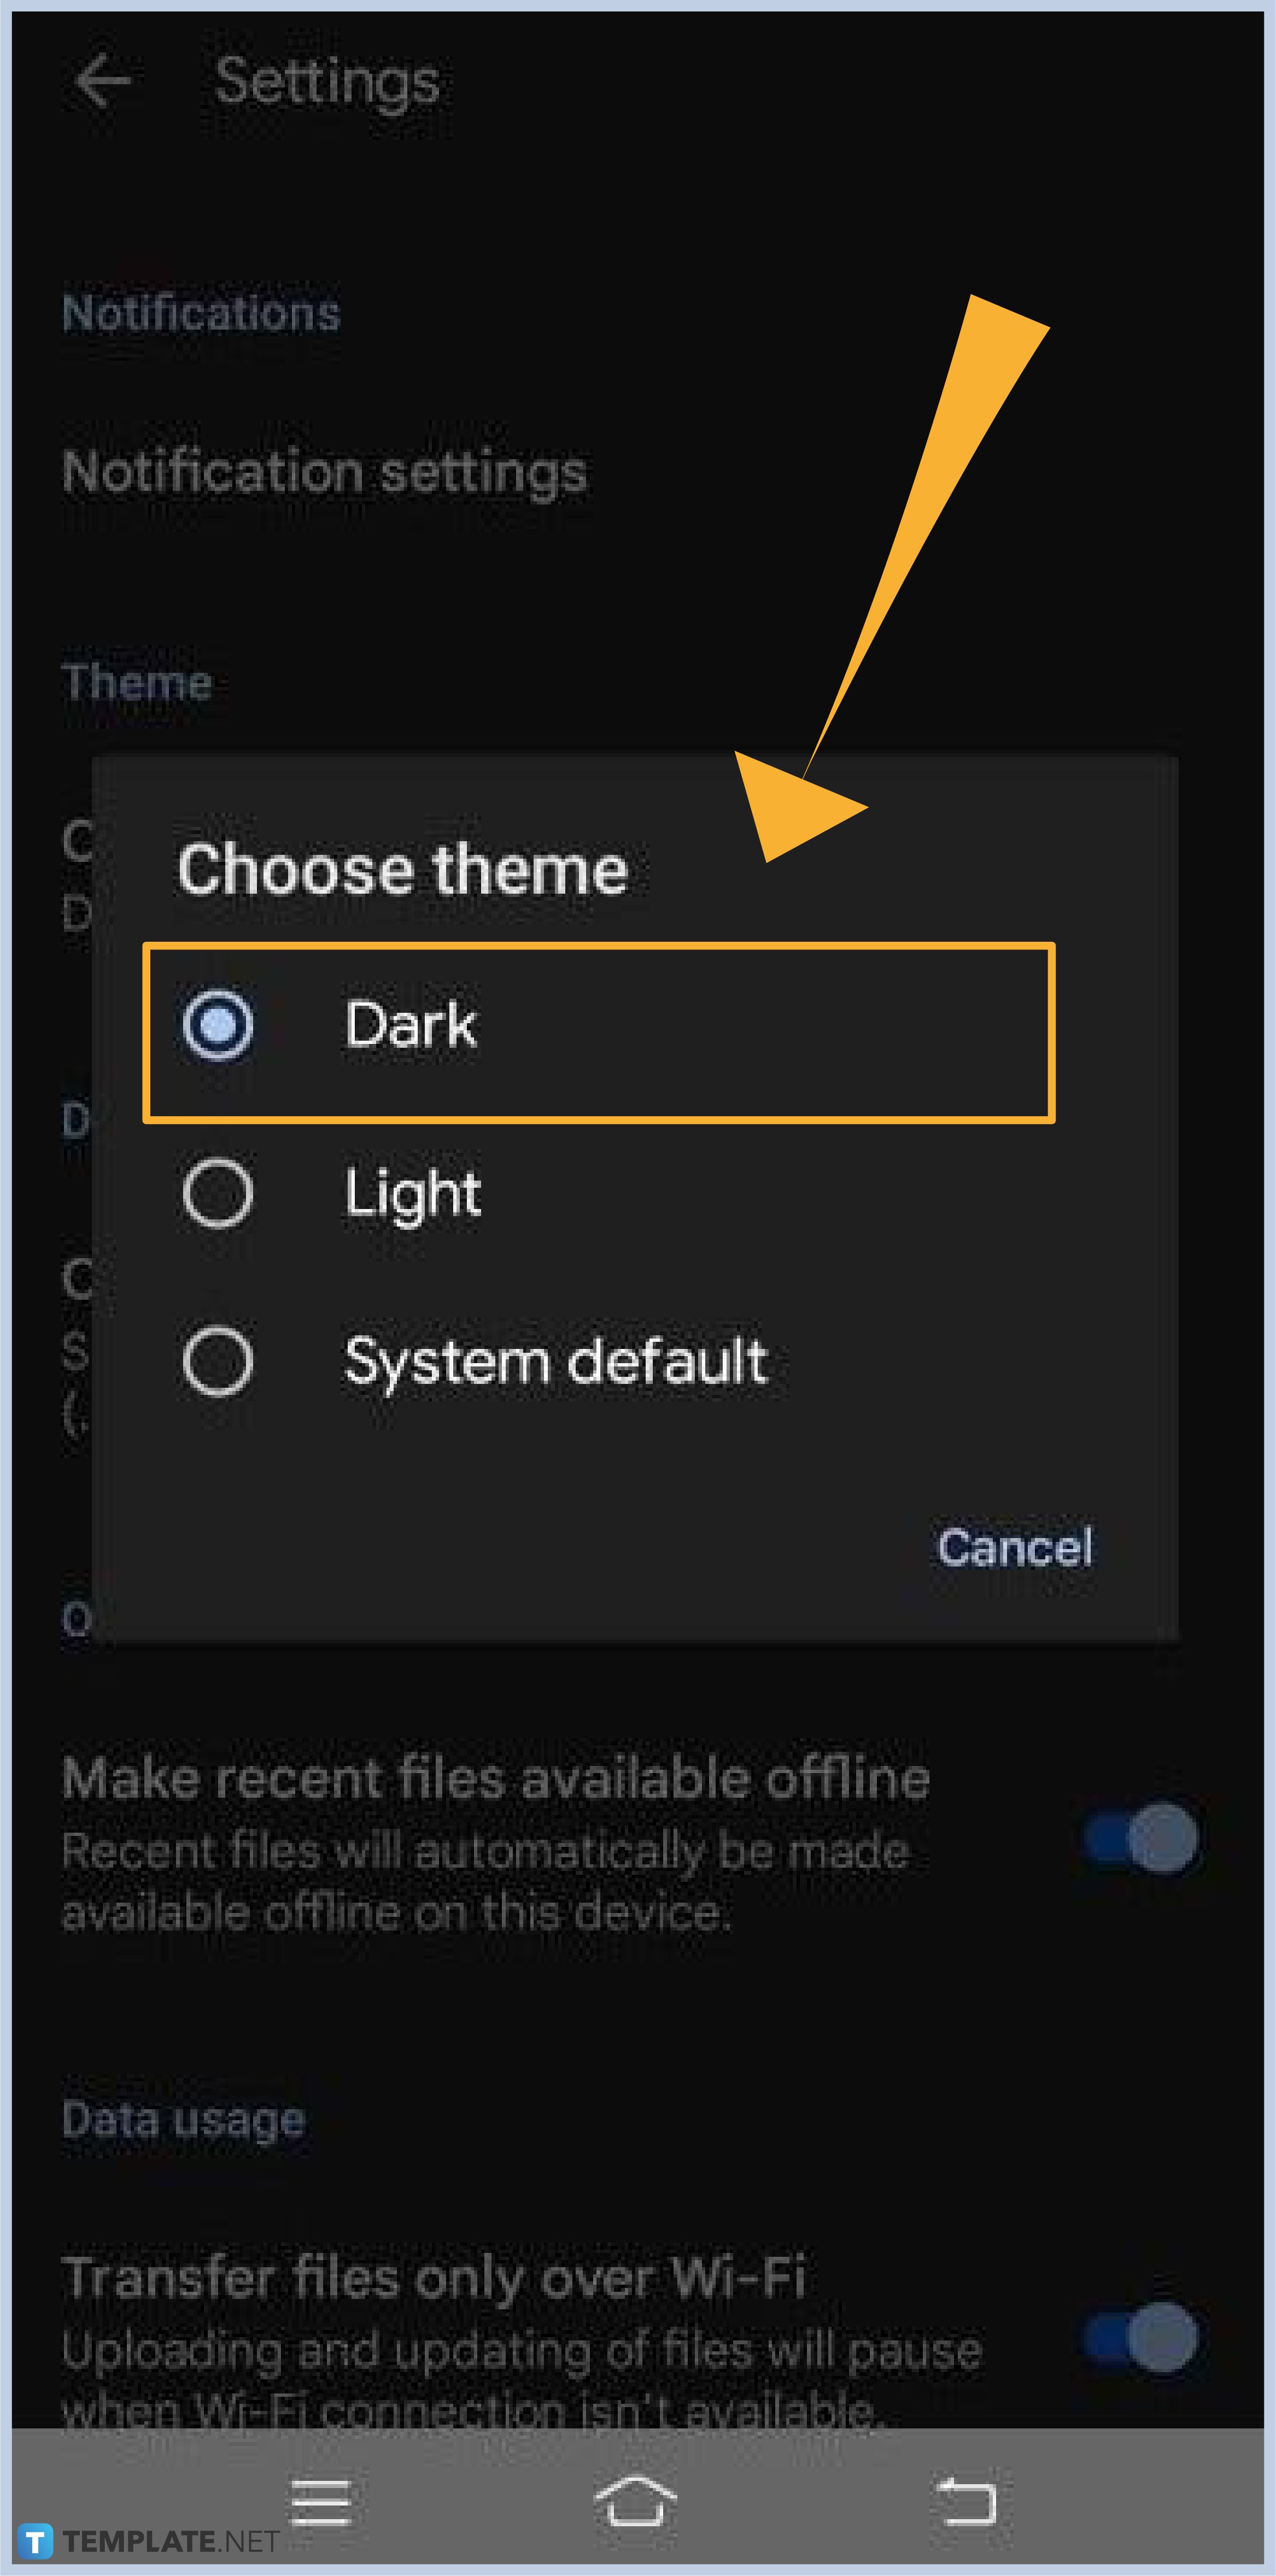 step-4-go-to-choose-theme-and-select-dark-01